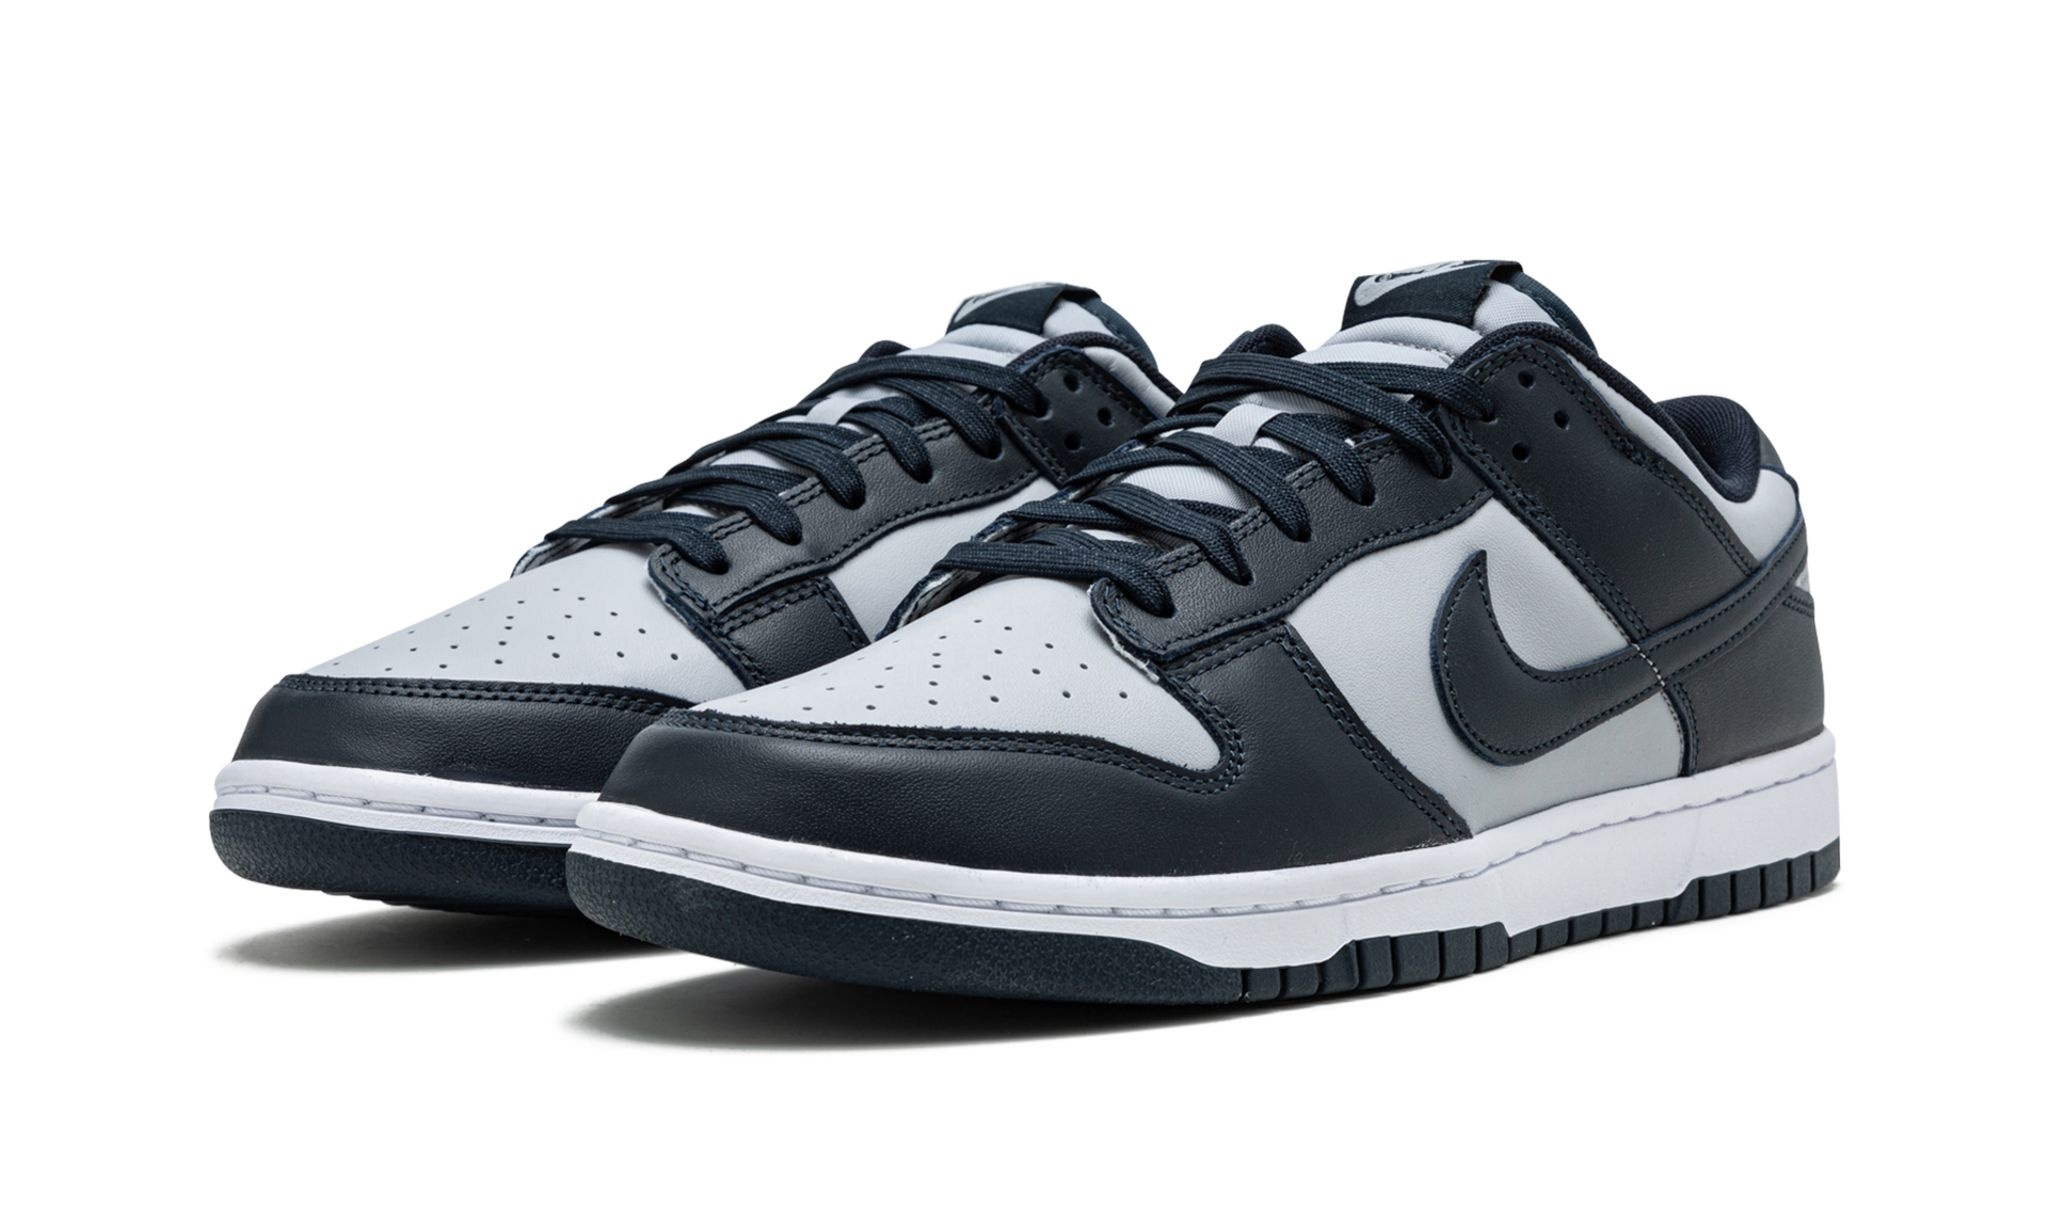 Dunk Low "Georgetown" - 2